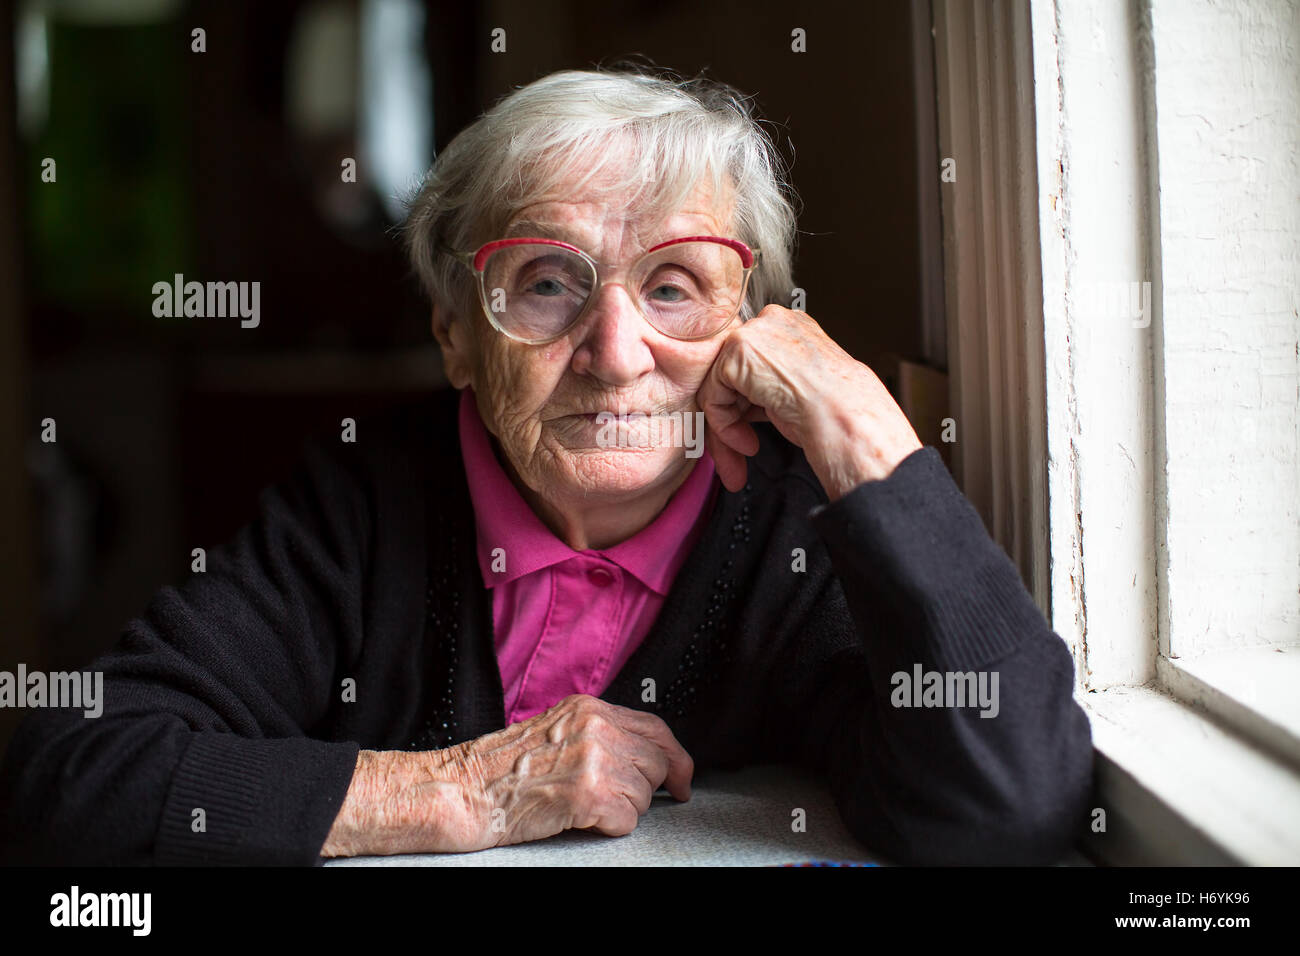 Portrait of elderly woman with glasses. Stock Photo